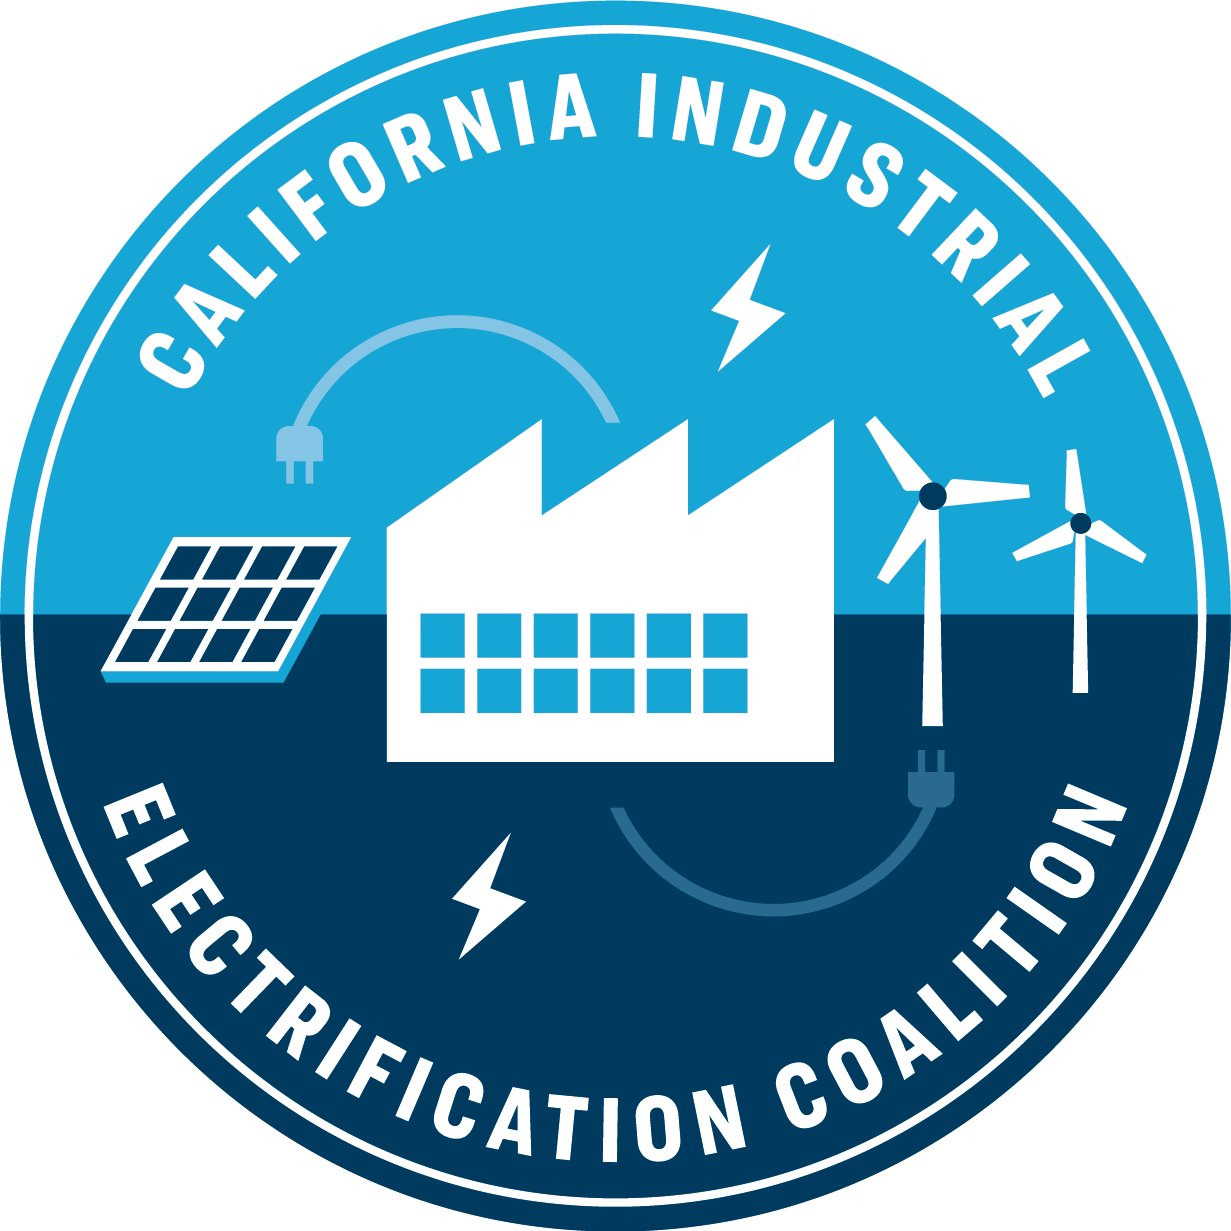 Industry is the largest source of fracked gas consumption in California. We’re out to fix that and clean our air. Clean electrons only, please.